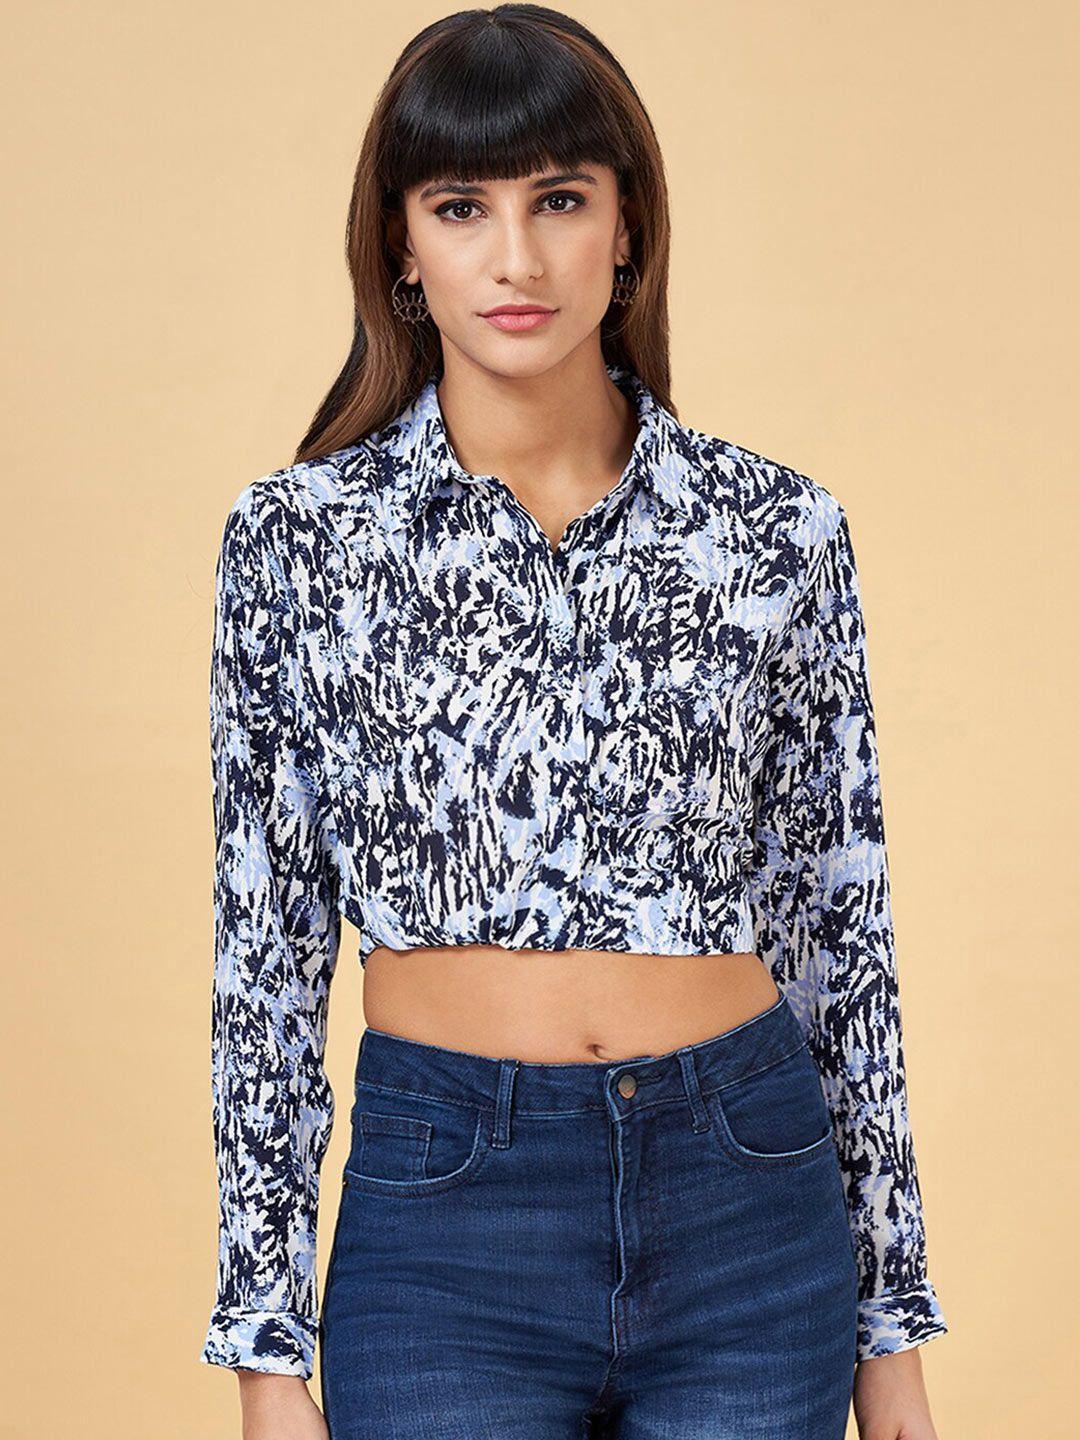 sf jeans by pantaloons print shirt style crop top